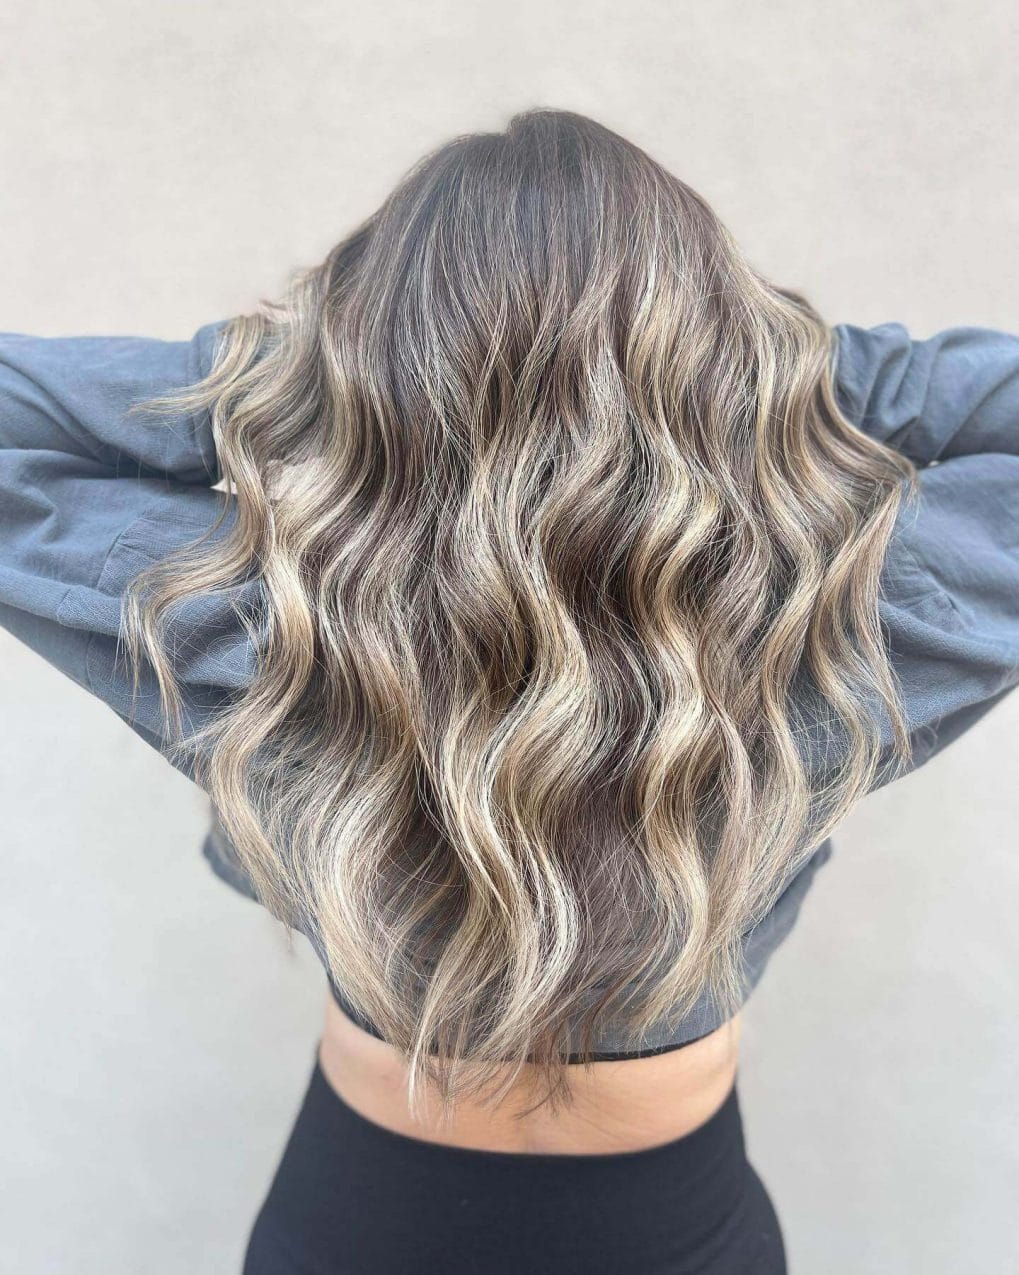 Full waves in dusty ash to platinum blonde balayage, capturing wintry frost.